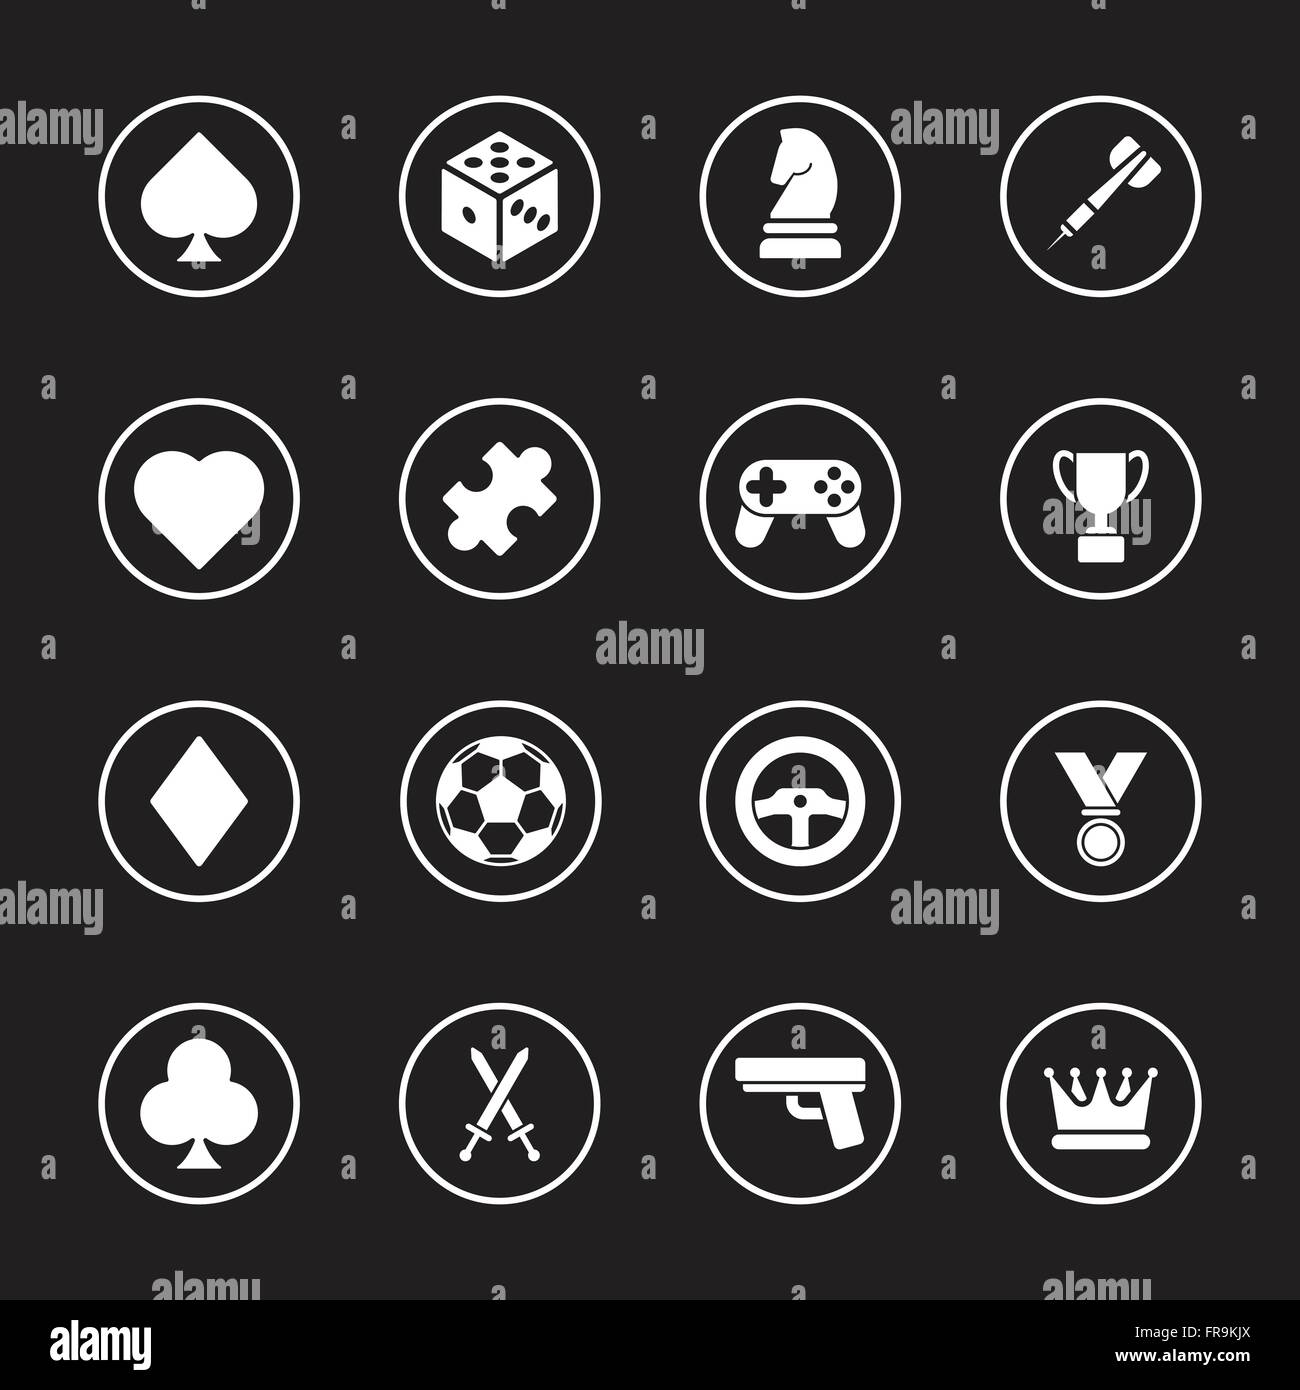 Two players game interface symbol - Free interface icons